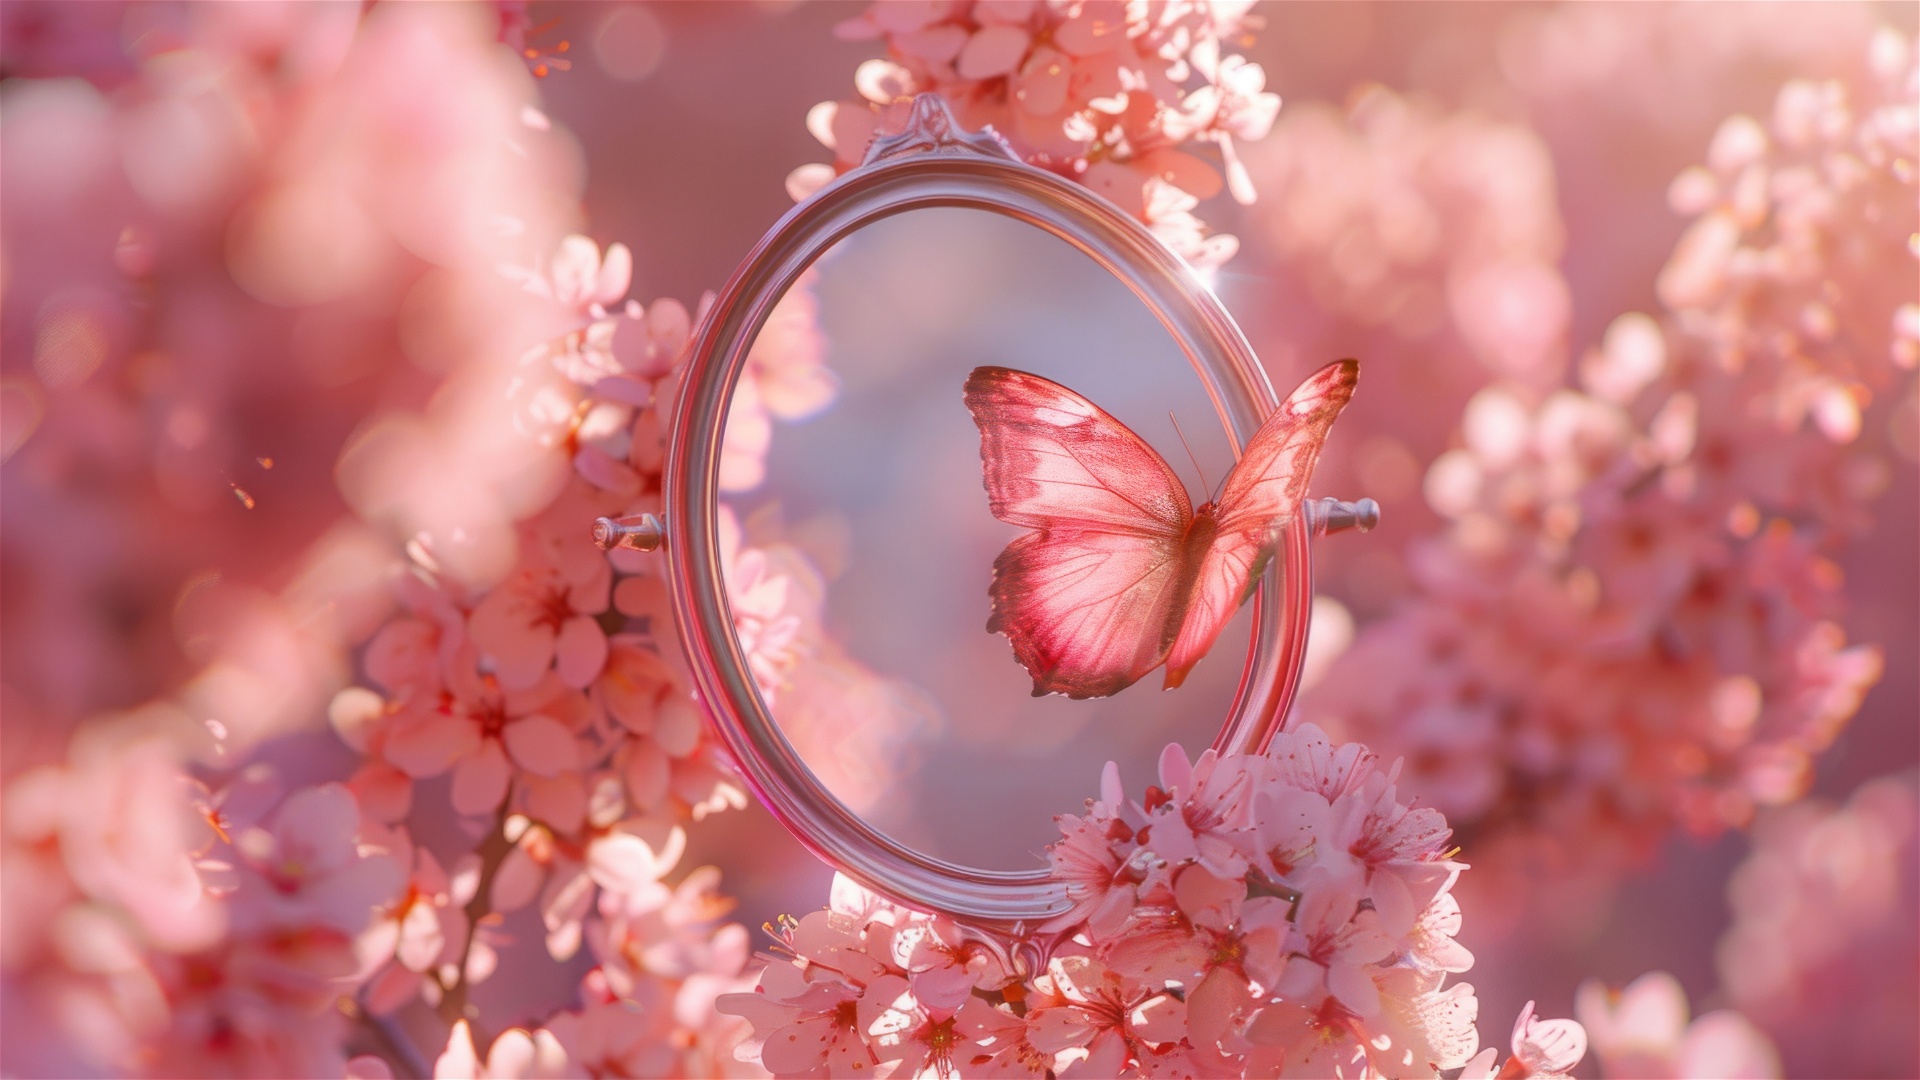 General 1920x1080 mirror pink cherry blossom butterfly white AI art